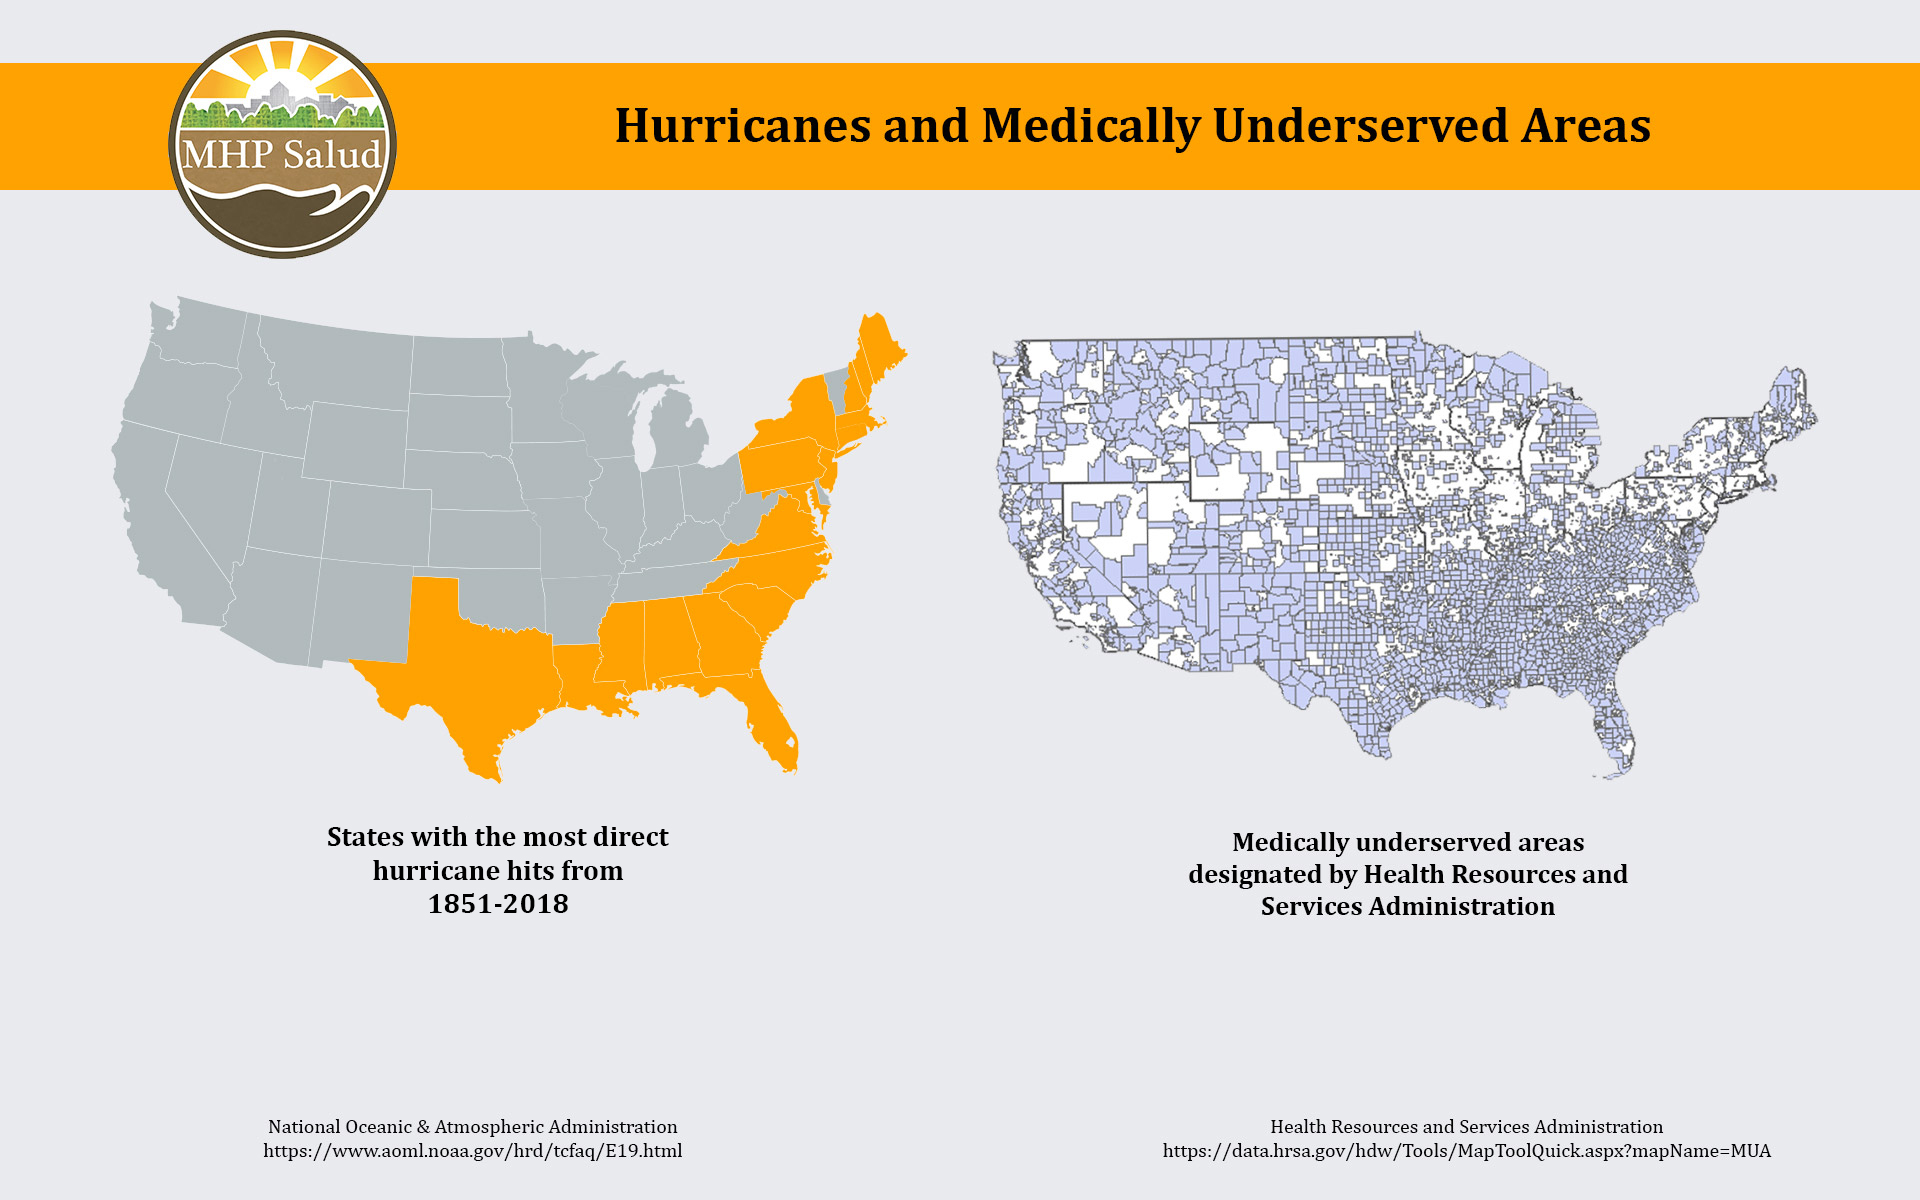 A map of the US with states that have been stuck by hurricanes the most and one map of the US that highlights areas deemed medically undeserved by HRSA.